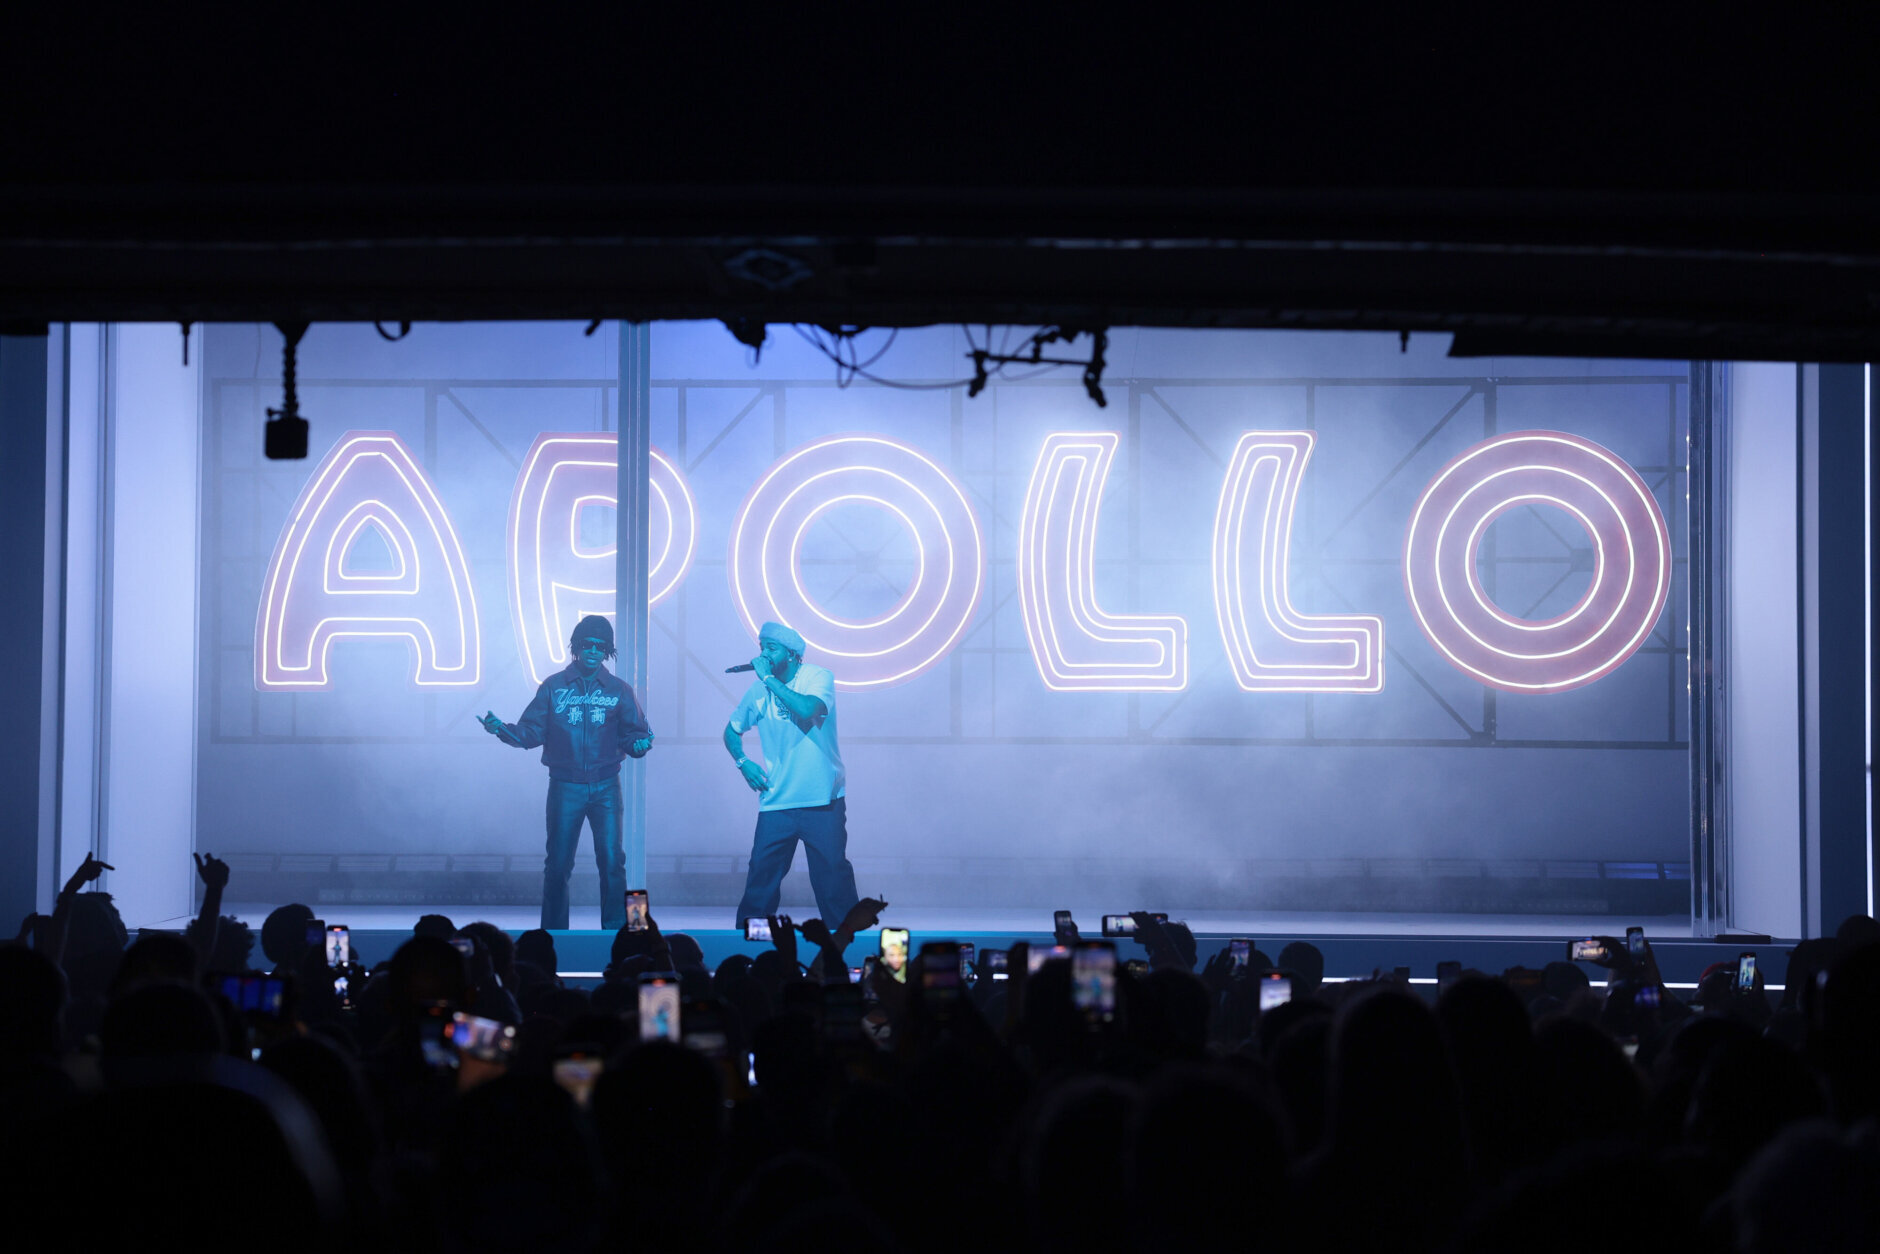 NEW YORK, NEW YORK - JANUARY 21: 21 Savage and Drake perform on stage at The Apollo Theater on January 21, 2023 in New York City. (Photo by Dimitrios Kambouris/Getty Images for SiriusXM)